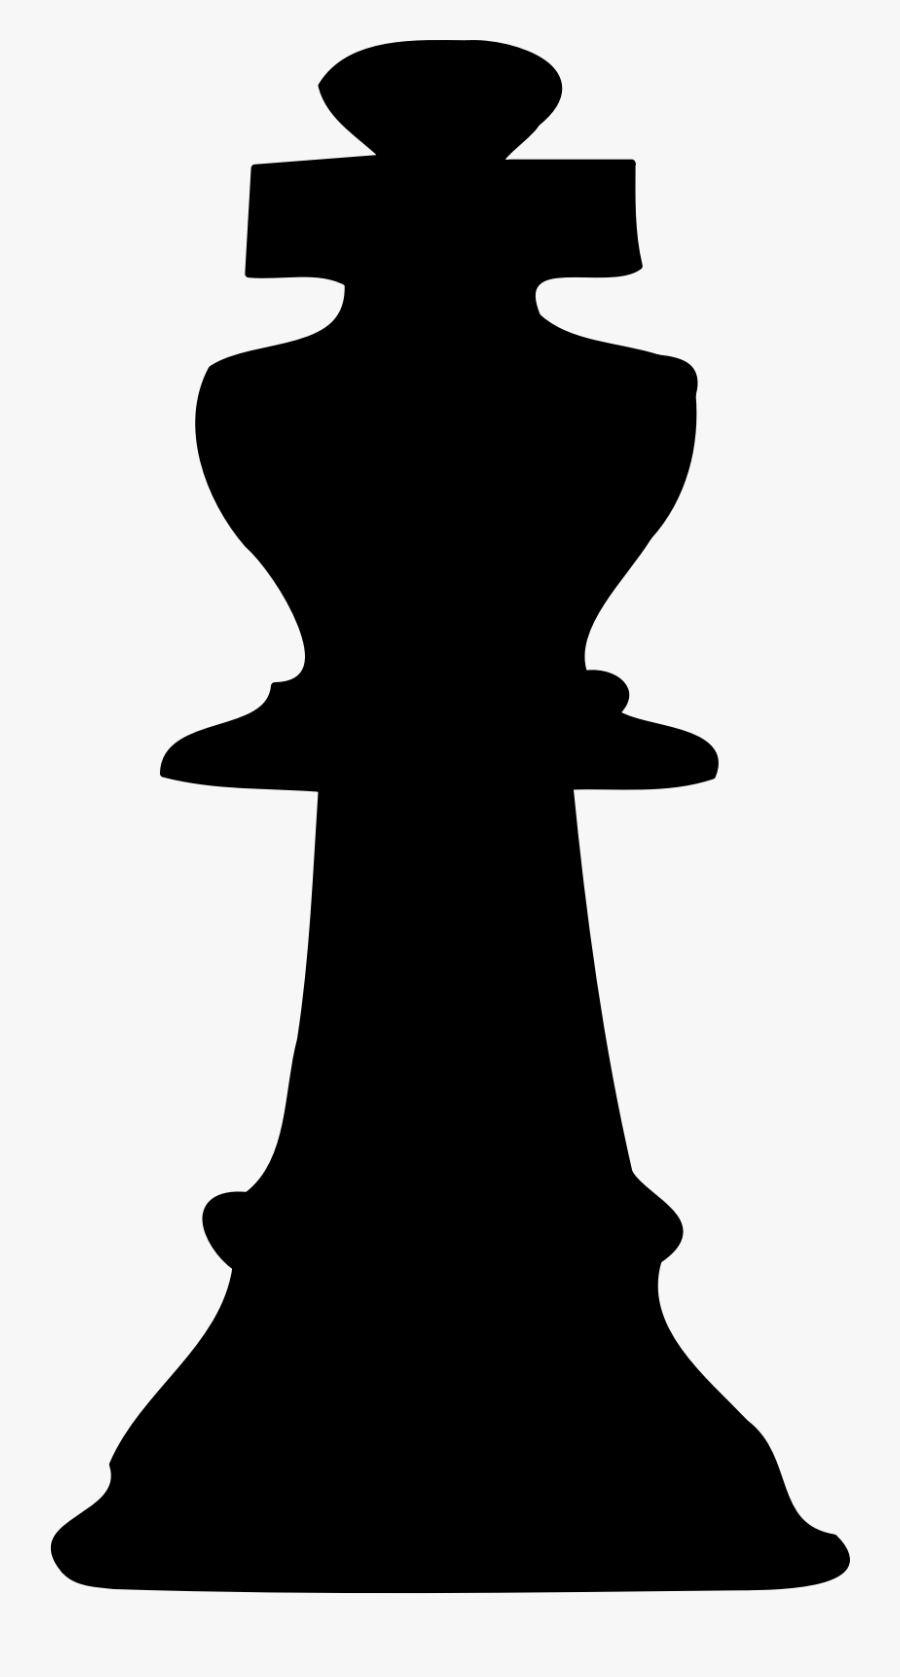 Transparent Throne Clipart Black And White - King Chess Piece Clip Art, Transparent Clipart